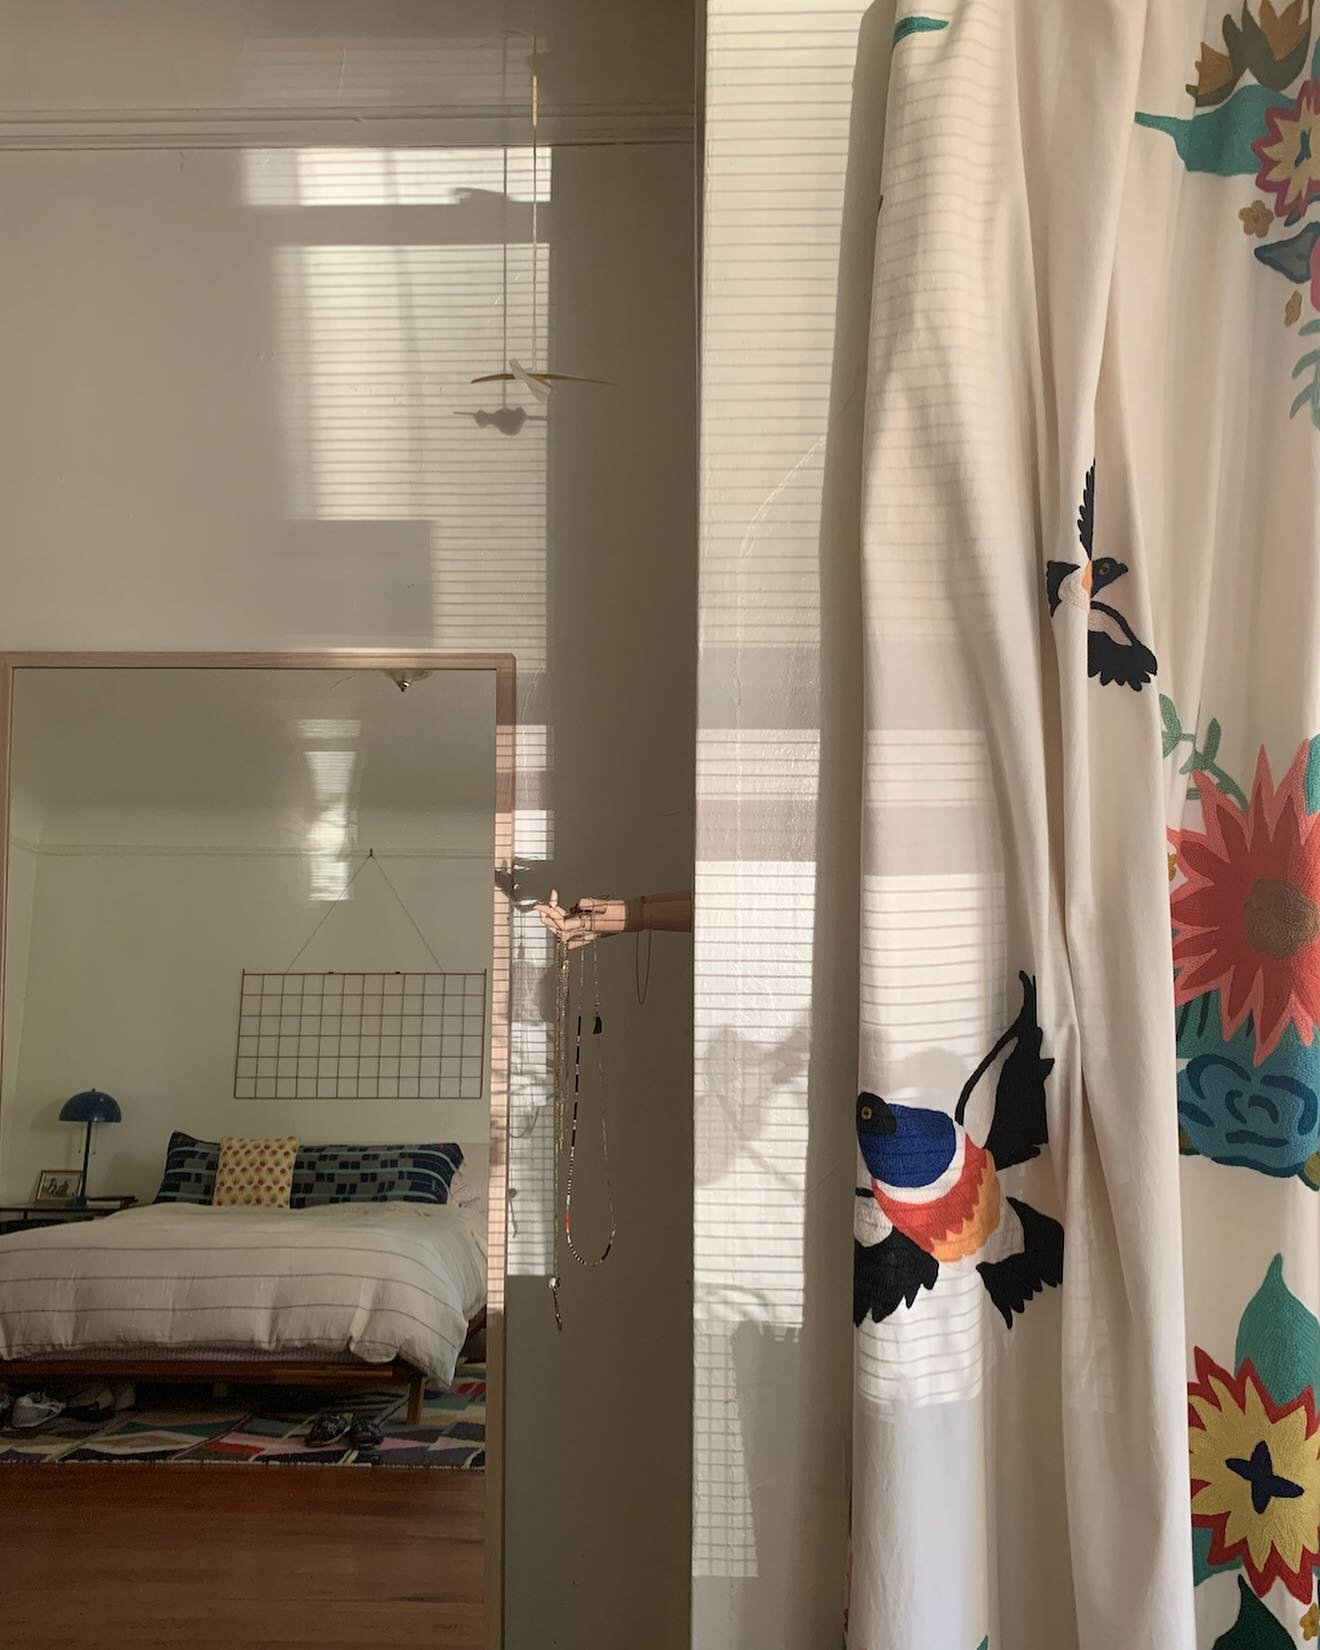 When my partner moved in, we switched around all the rooms in the apartment. The two bedrooms became our offices, the dining room became our living room, and the living room became our bedroom. I wanted to change things up so that it felt more like *